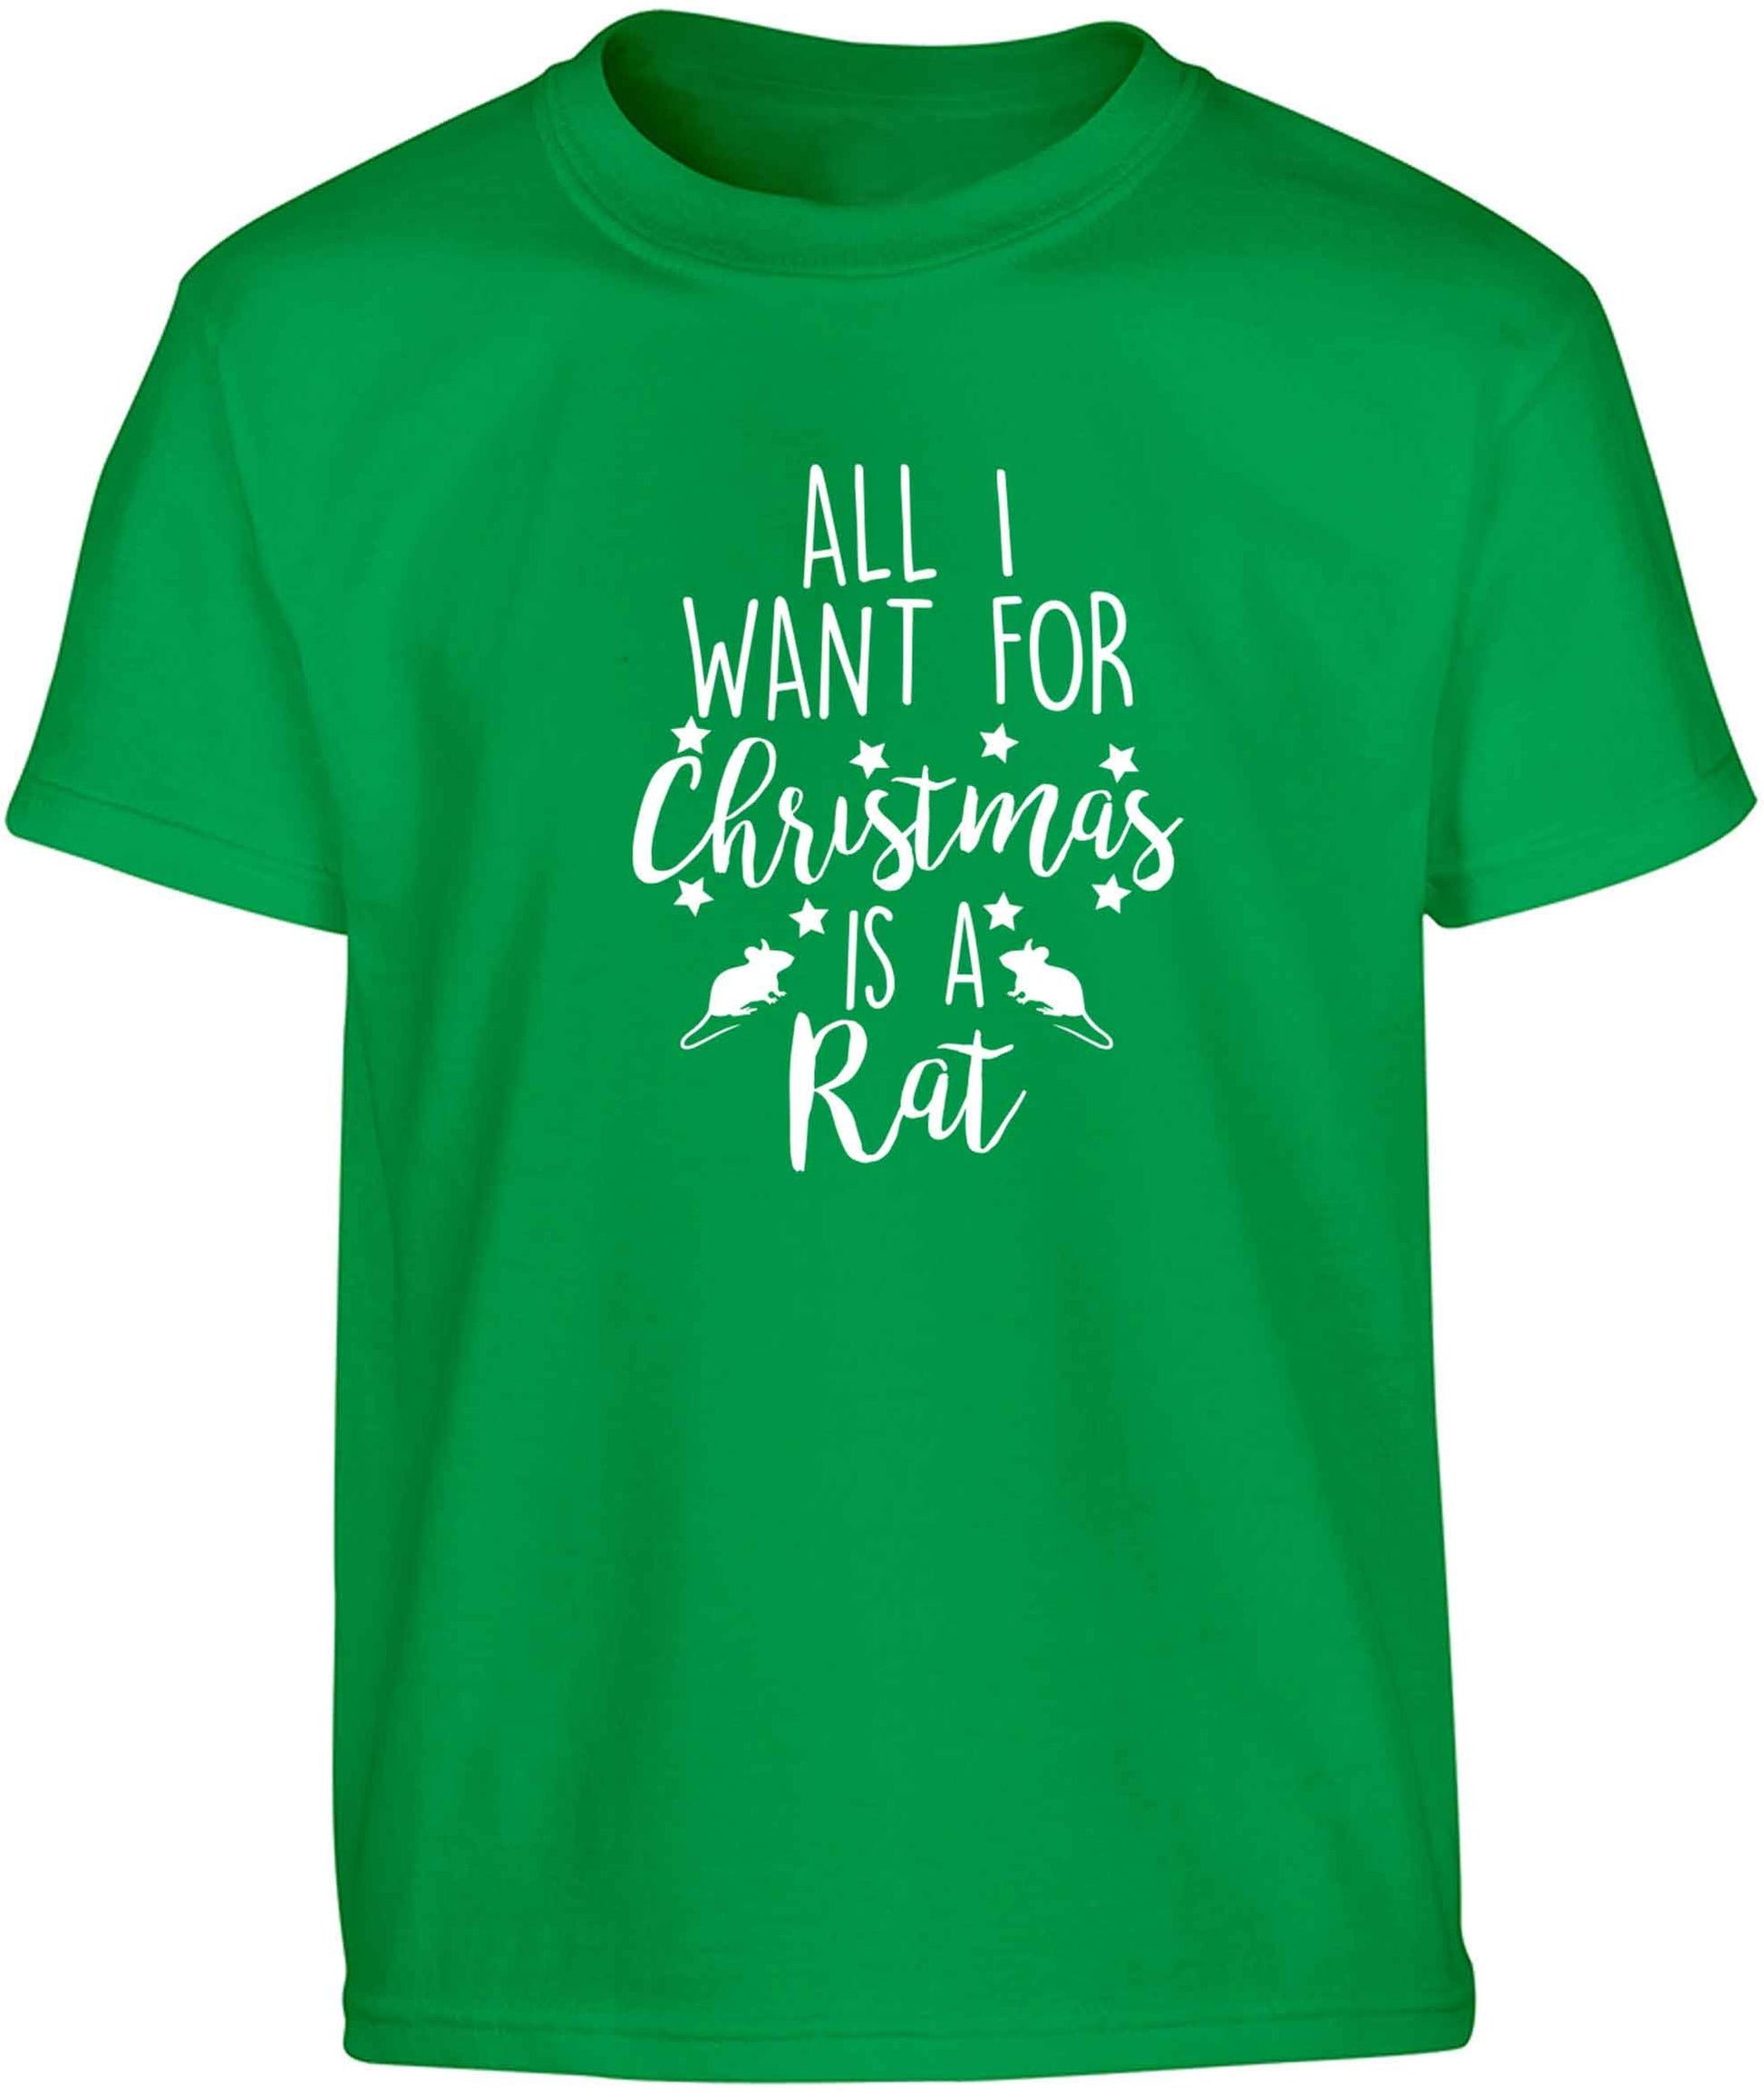 All I want for Christmas is a rat Children's green Tshirt 12-13 Years